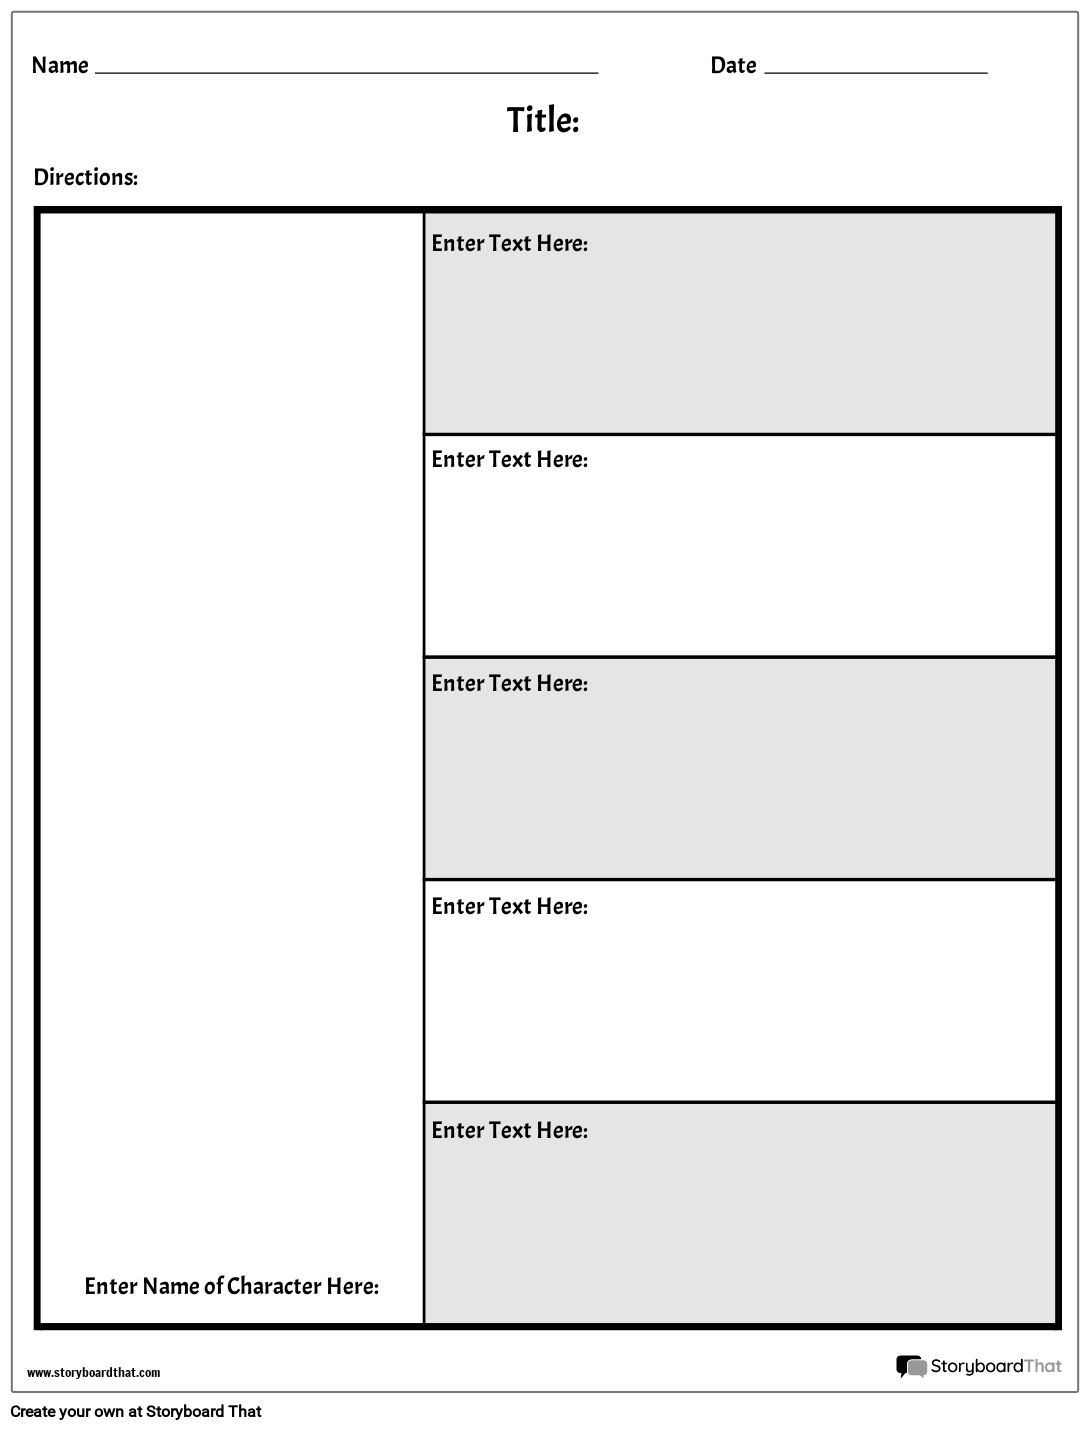 character-chart-5-questions-storyboard-by-worksheet-templates